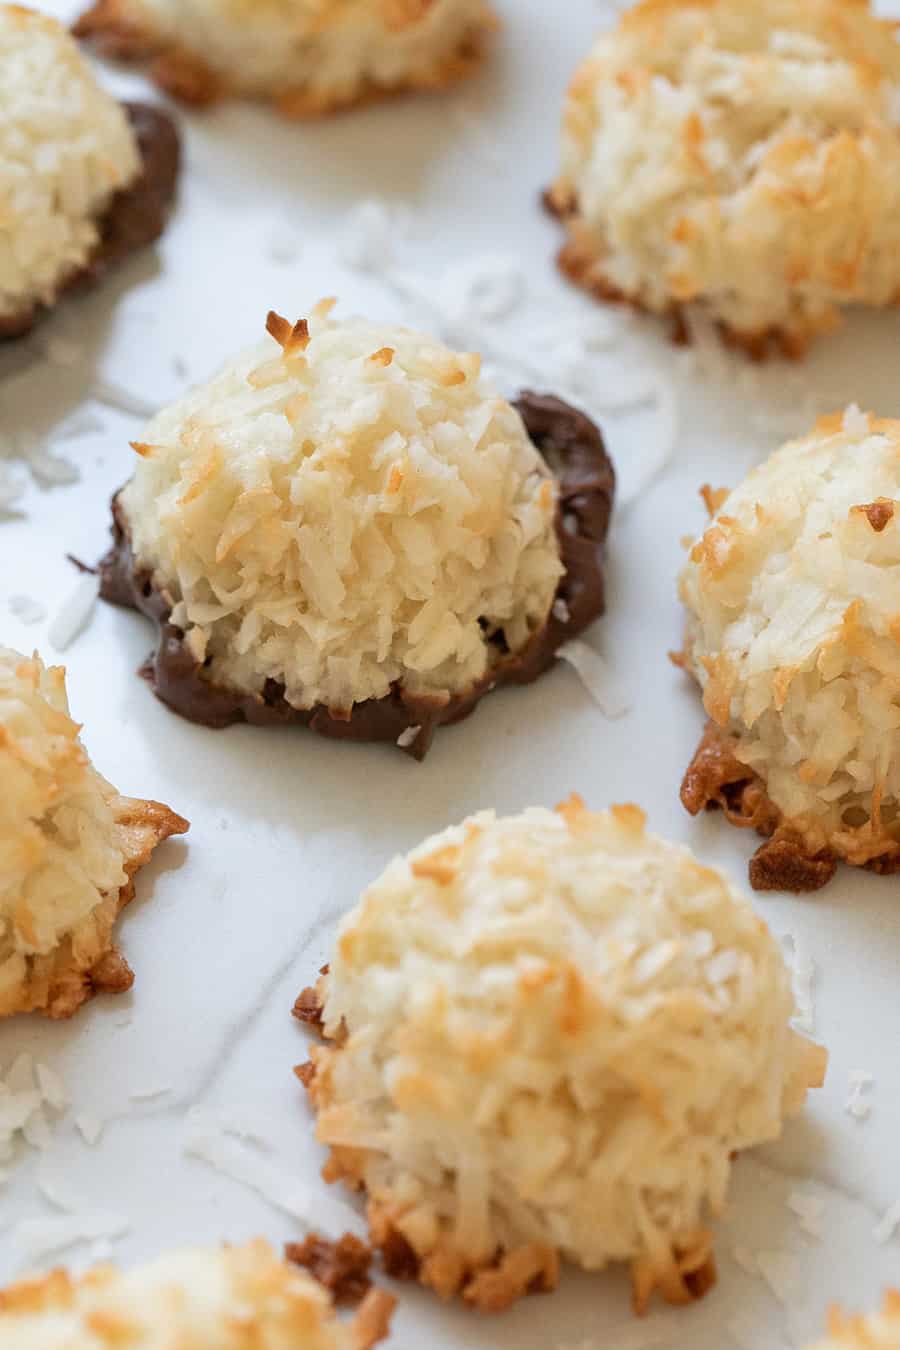 Coconut macaroons dipped in chocolate - mashed potatoes